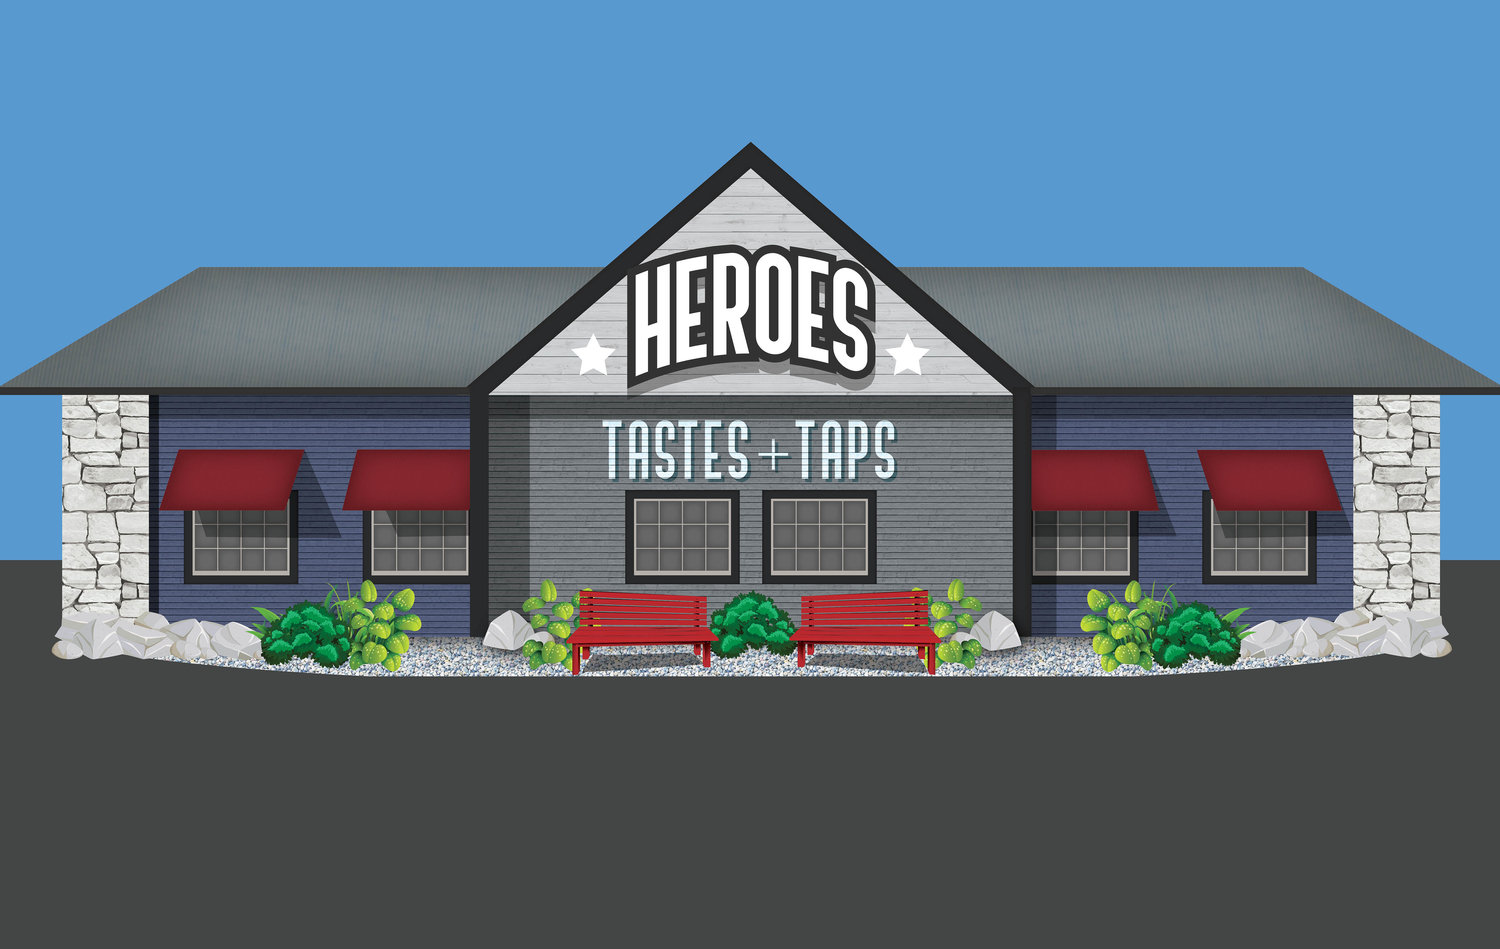 Branson Restaurants is renovating a former Montana Mike's Steakhouse into Heroes Tastes and Taps.